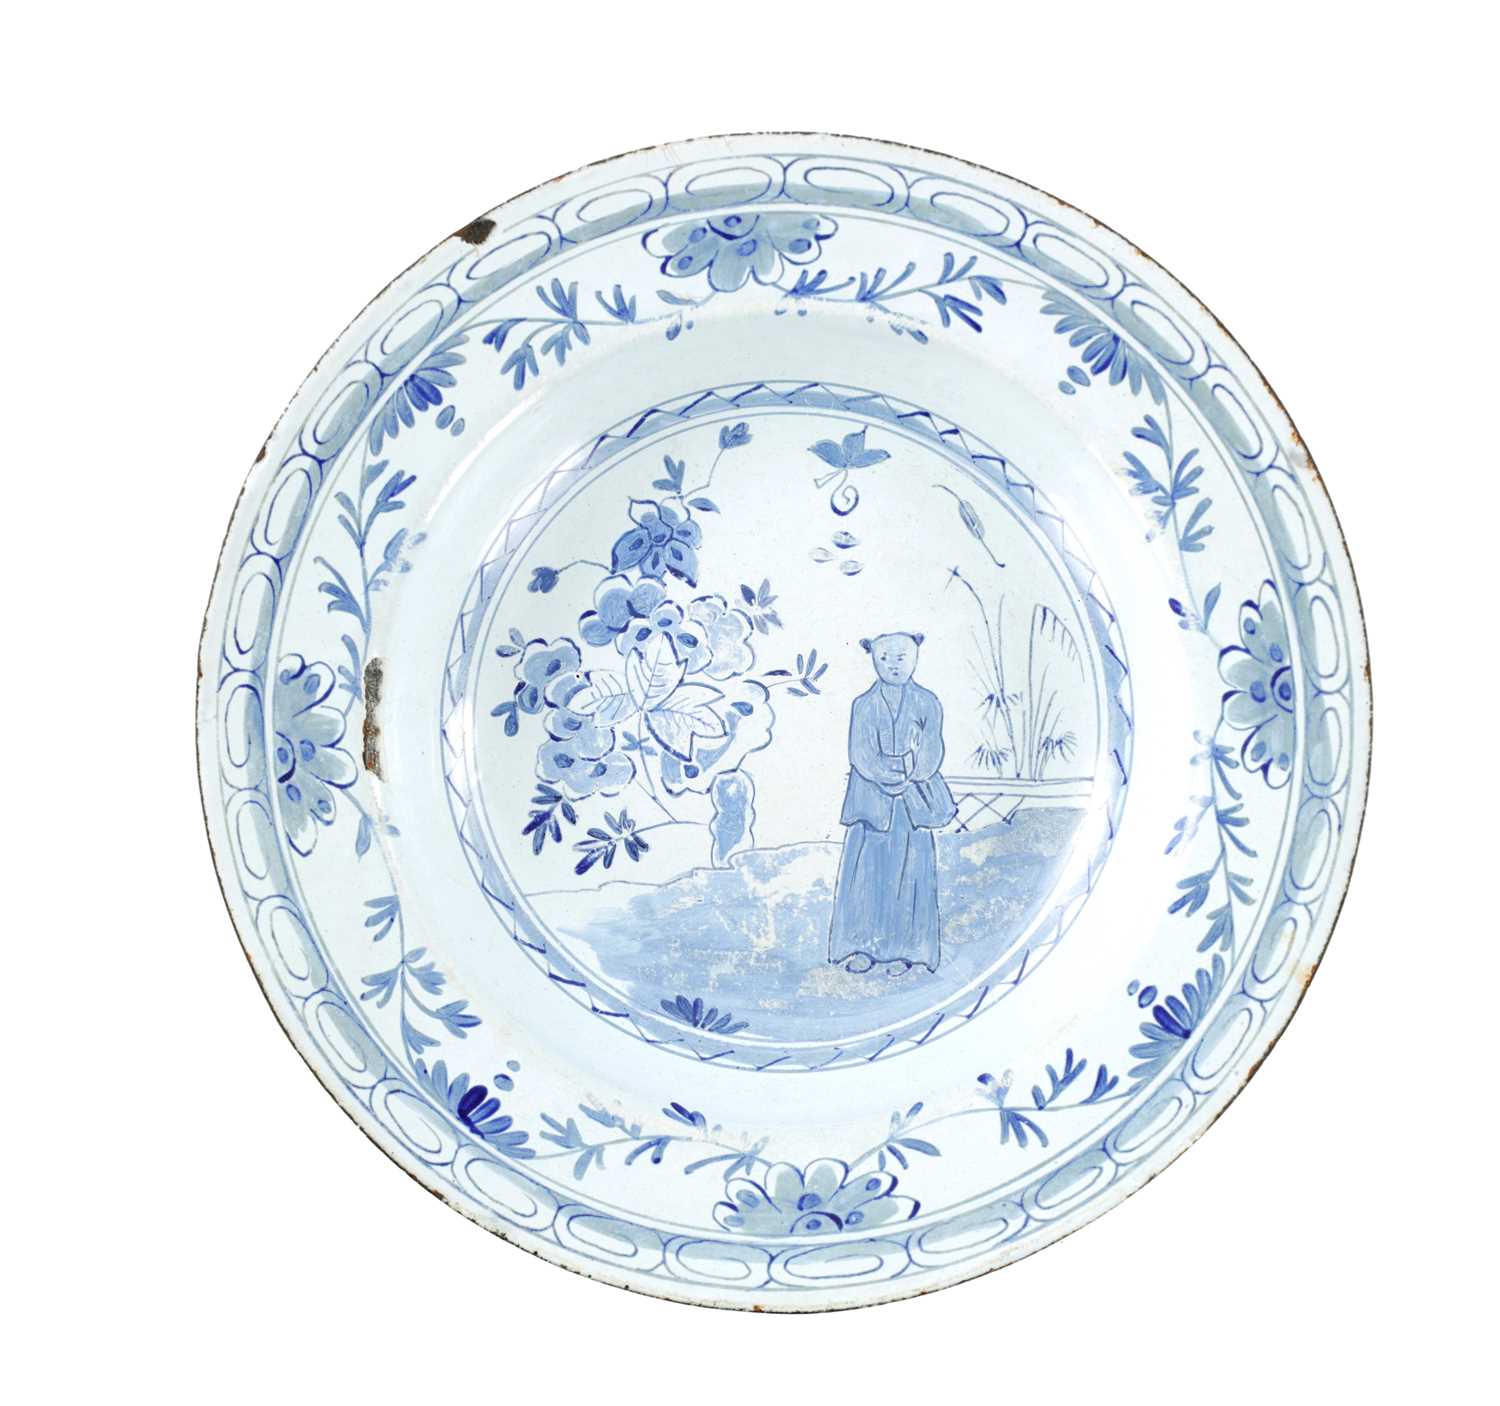 AN 18TH CENTURY TINWARE BLUE AND WHITE DELFT STYLE PLATE